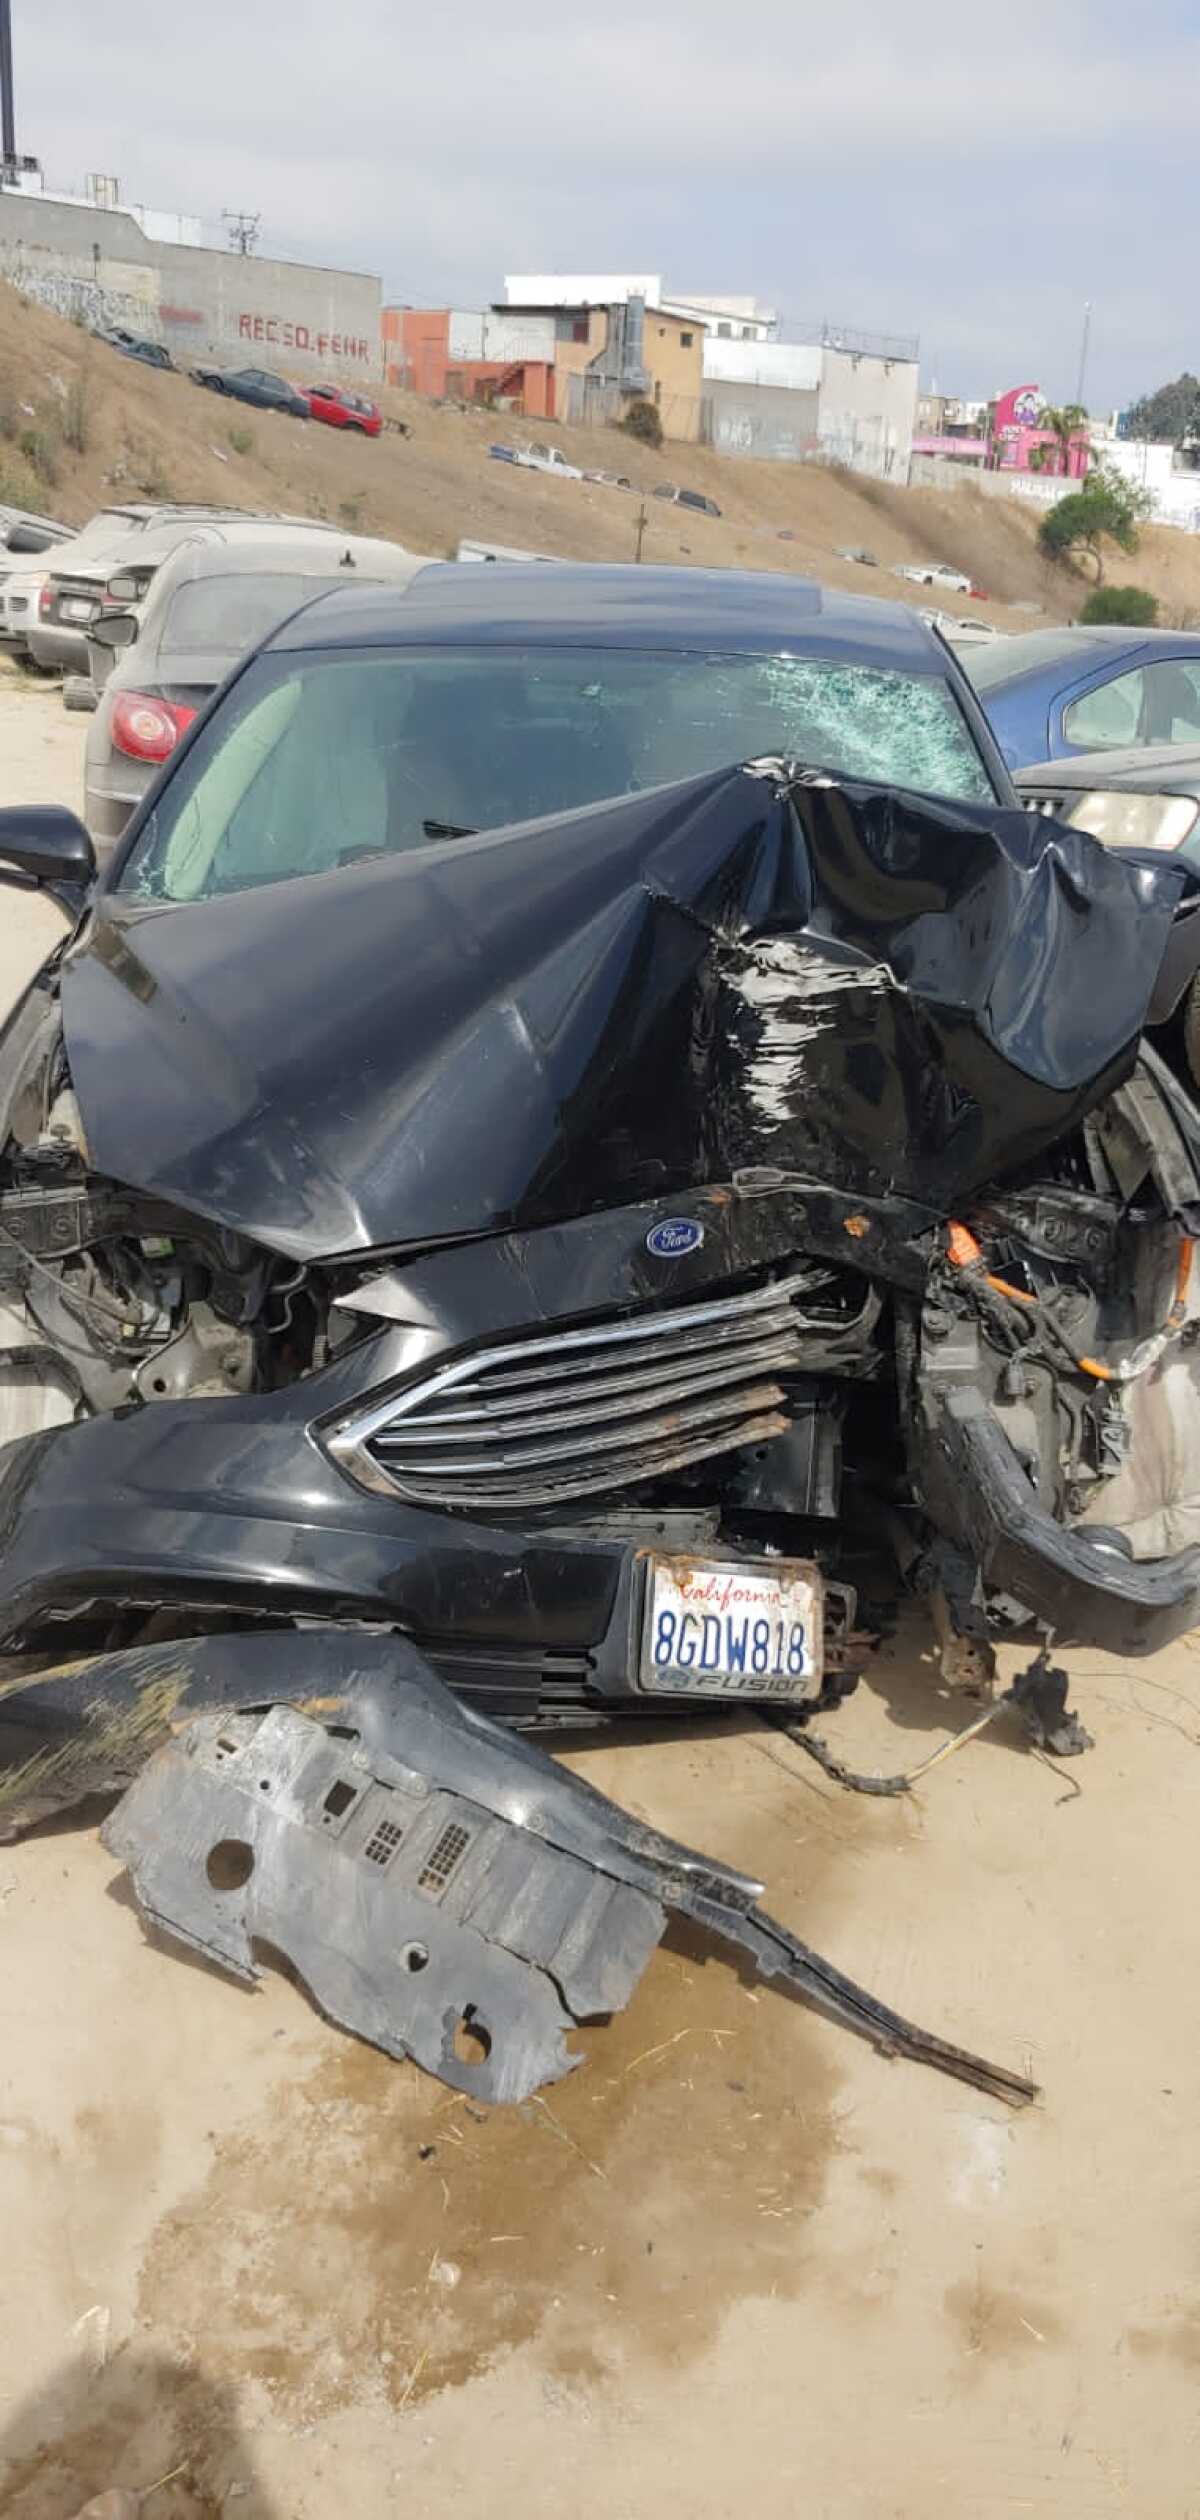 Renzzo Reyes' car cleared the center divider of the highway and hit a tree. Pictured is his car after the accident.